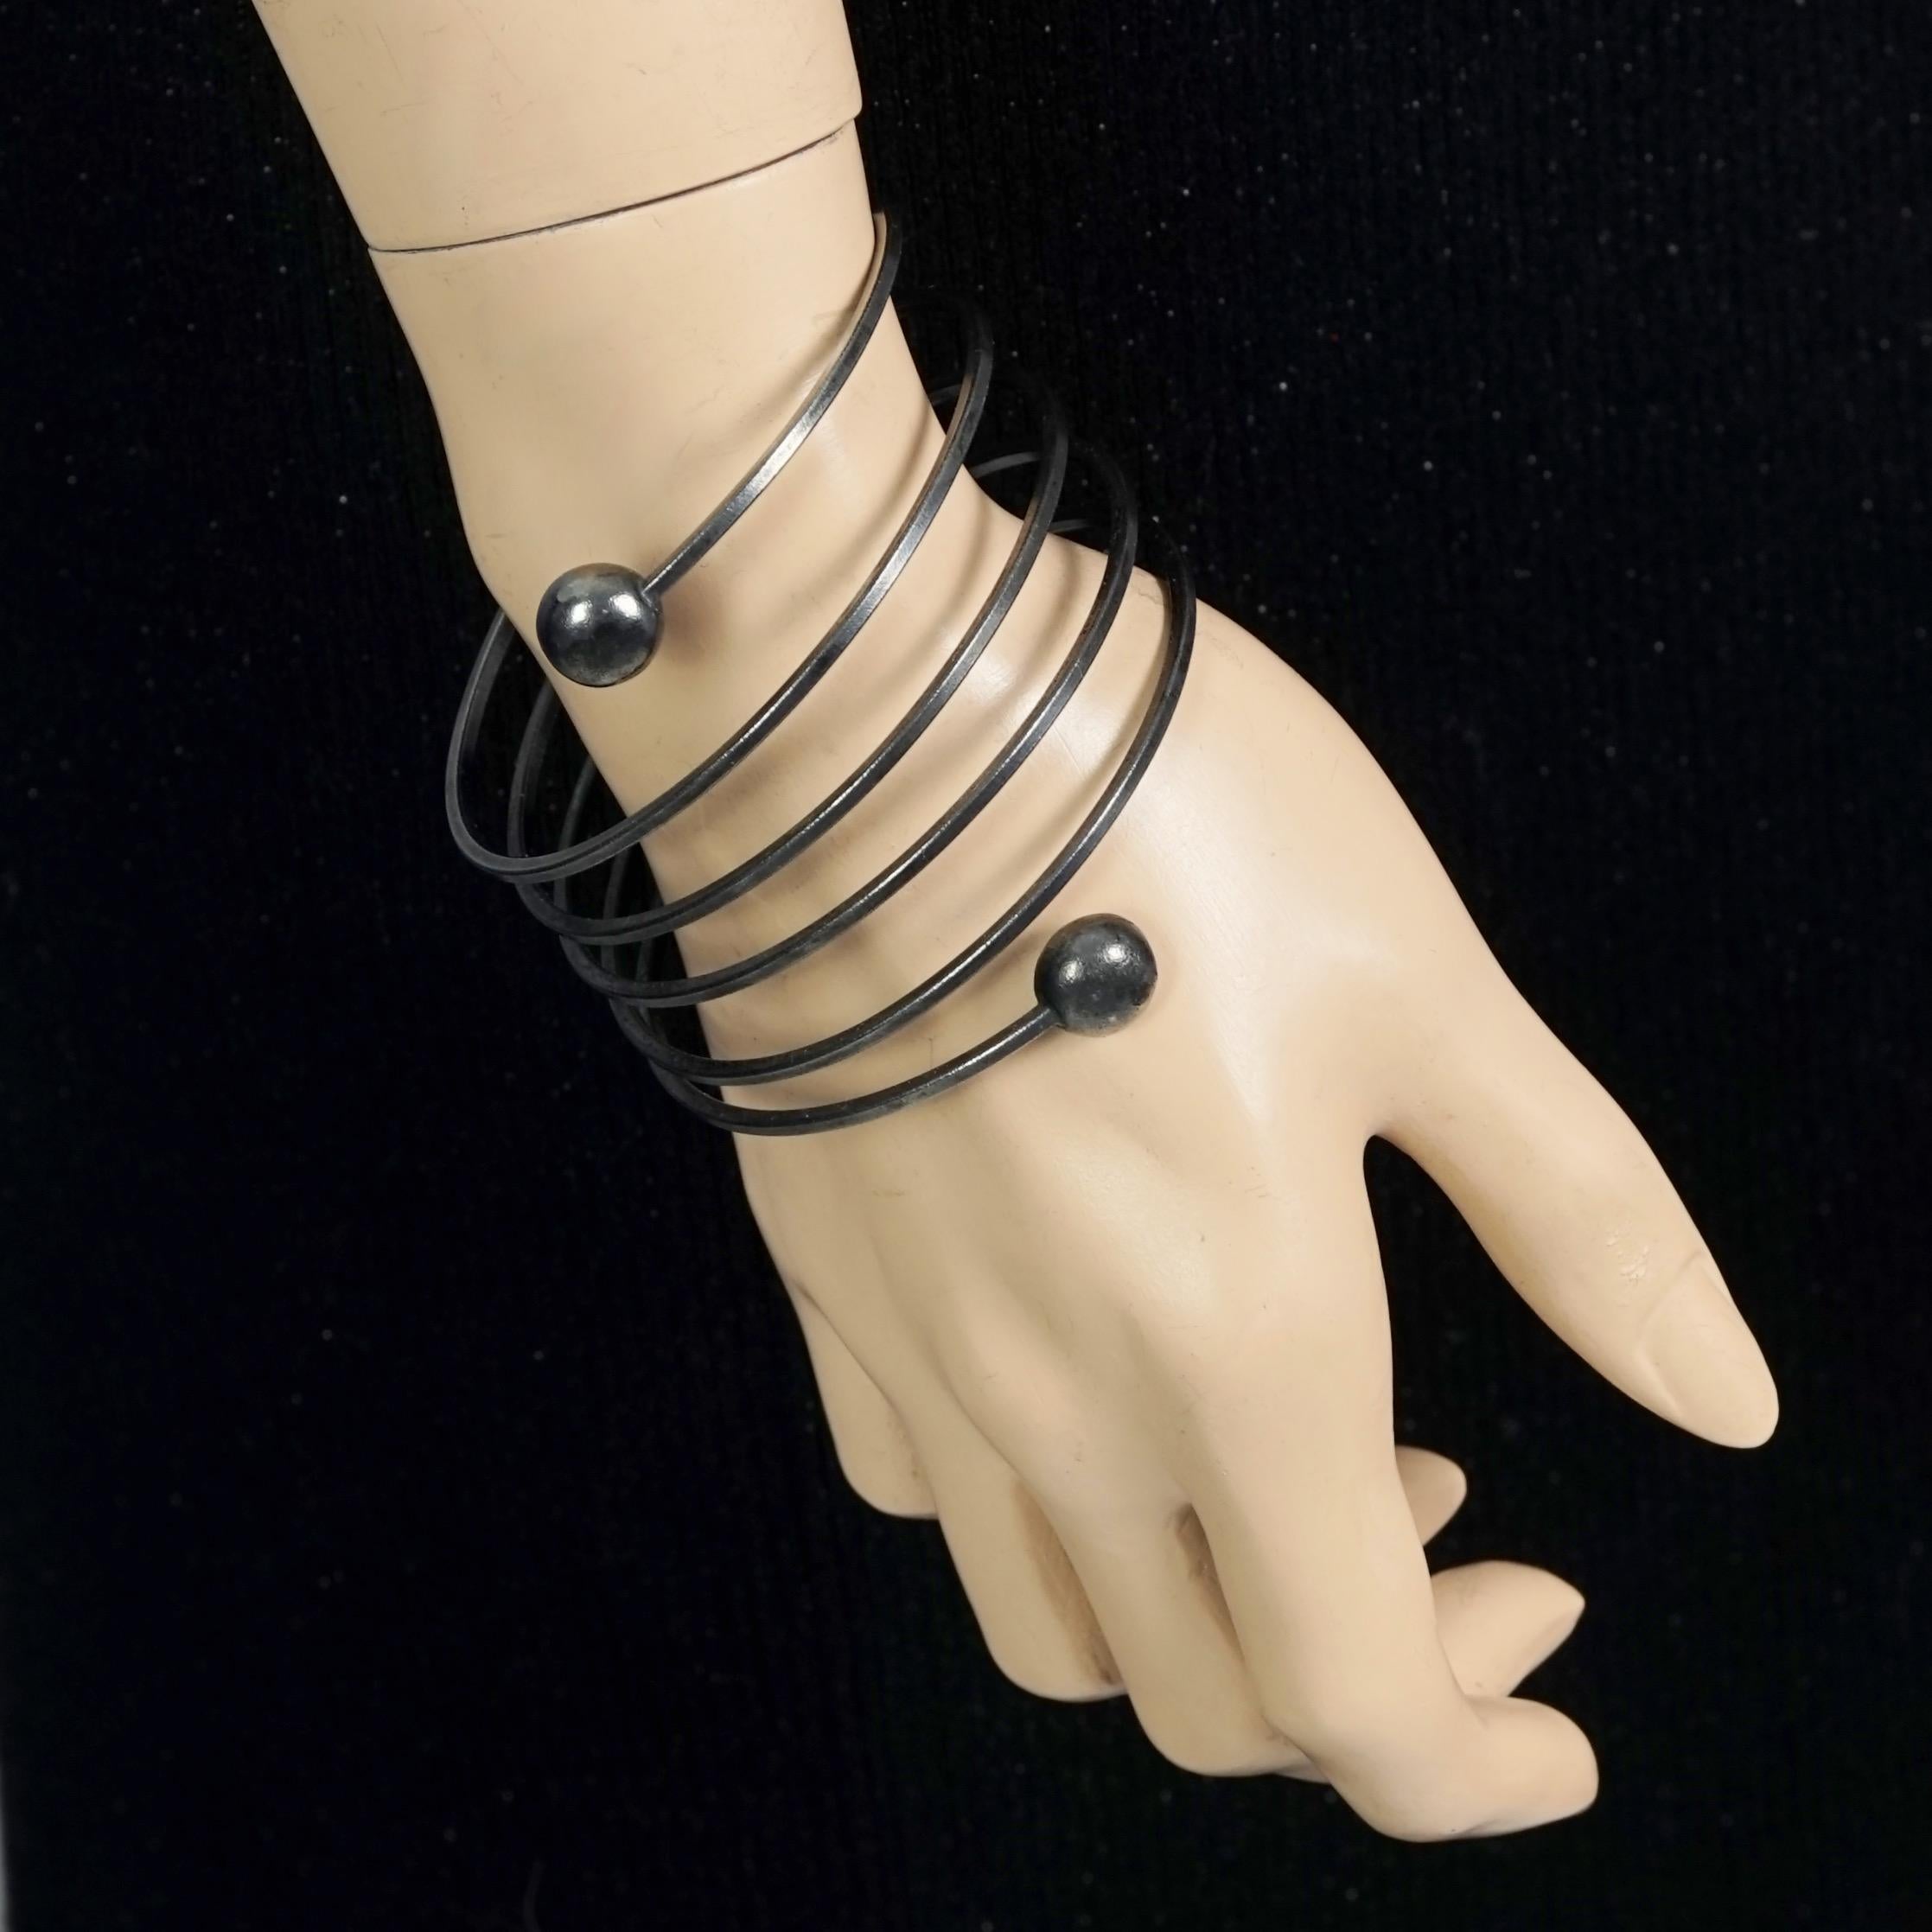 Vintage JEAN PAUL GAULTIER Gothic Coil Cuff Bracelet

Measurements:
Height: 2.75 inches (7 cm)
Inner circumference: 7.87 inches (20 cm)

Features:
- 100% Authentic JEAN PAUL GAULTIER.
- Coil cuff bracelet with circular ends.
- Gunmetal tone